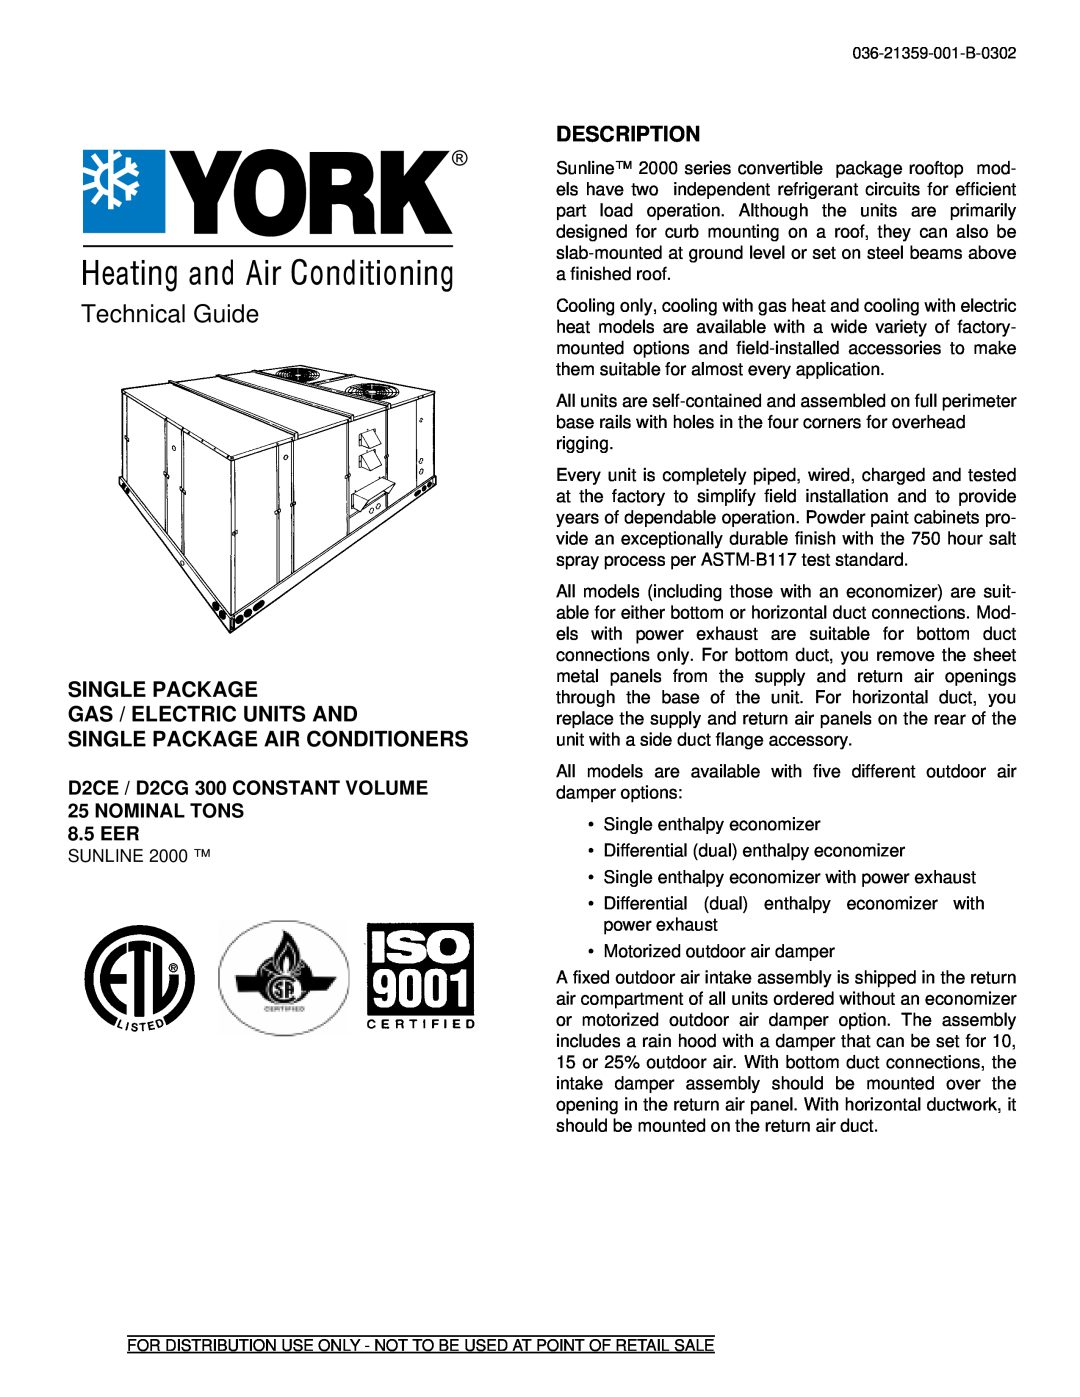 York D2CG manual Single Package Gas / Electric Units And, Single Package Air Conditioners, Description, Technical Guide 